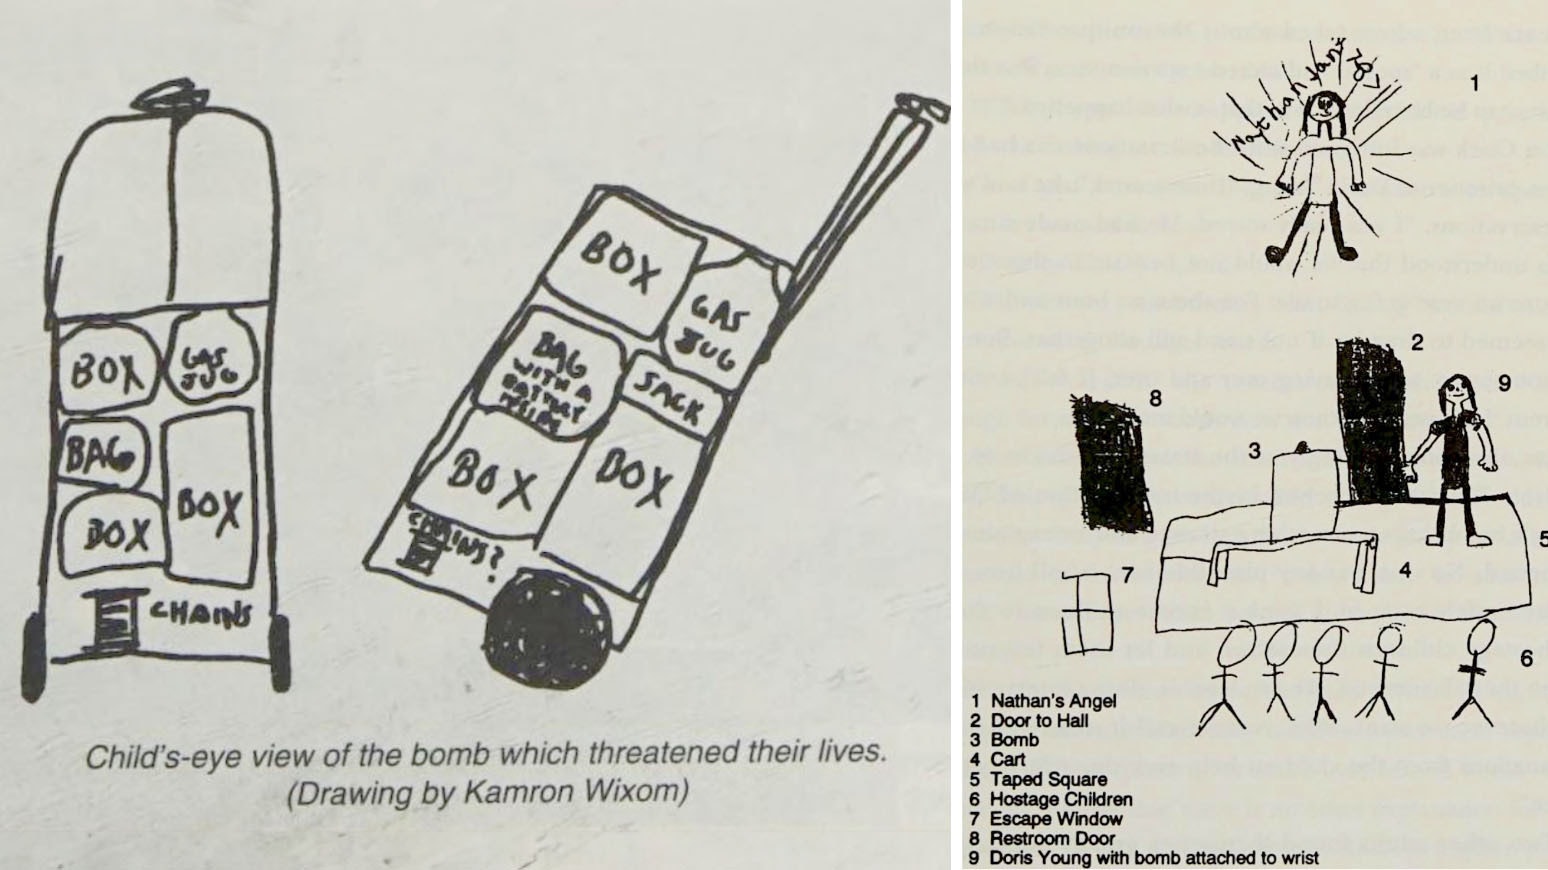 Drawings depicting scenes from the Cokeville Elementary School bombing from "The Cokeville Miracle" by Hartt and Judene Wixom. Left is a drawing of the cart filled with explosives and other ordinance. Right is a drawing by Nathan Hartley, which shows the scene, along with the angel he saw.